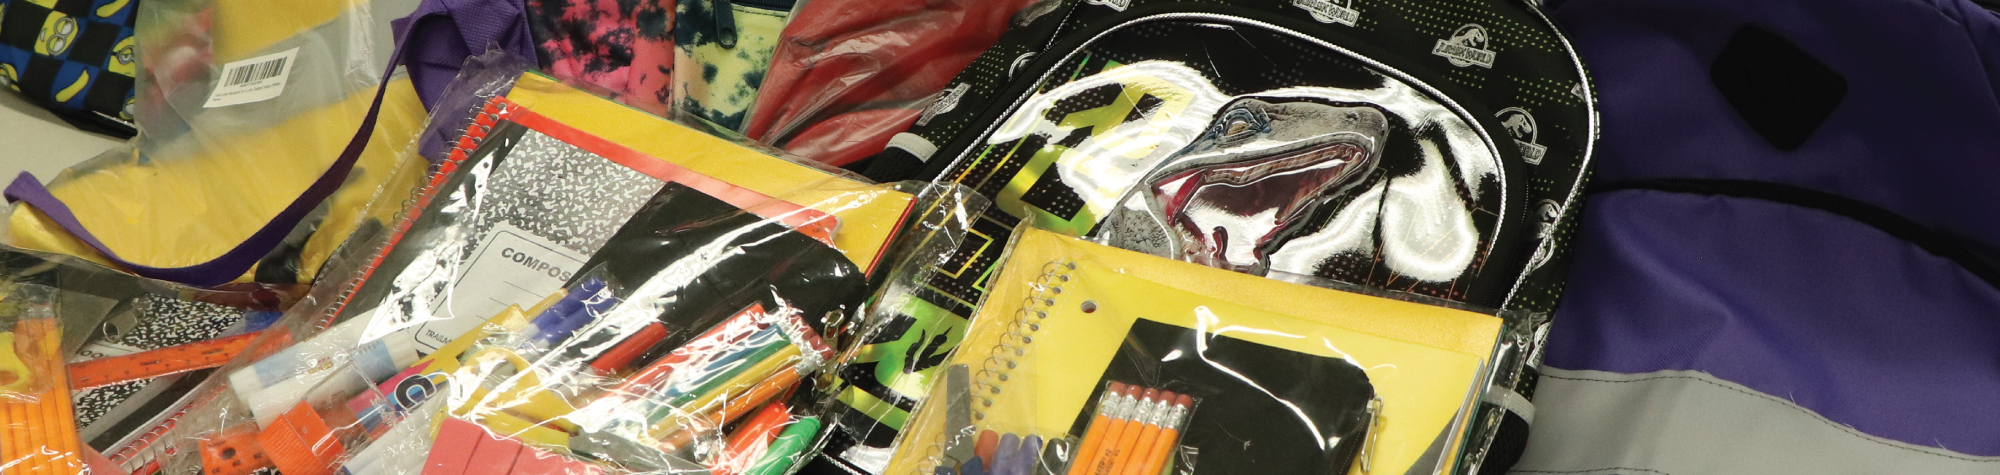 Merchants Insurance Group Helps Assured Partners Fill ‘Backpacks with Love’